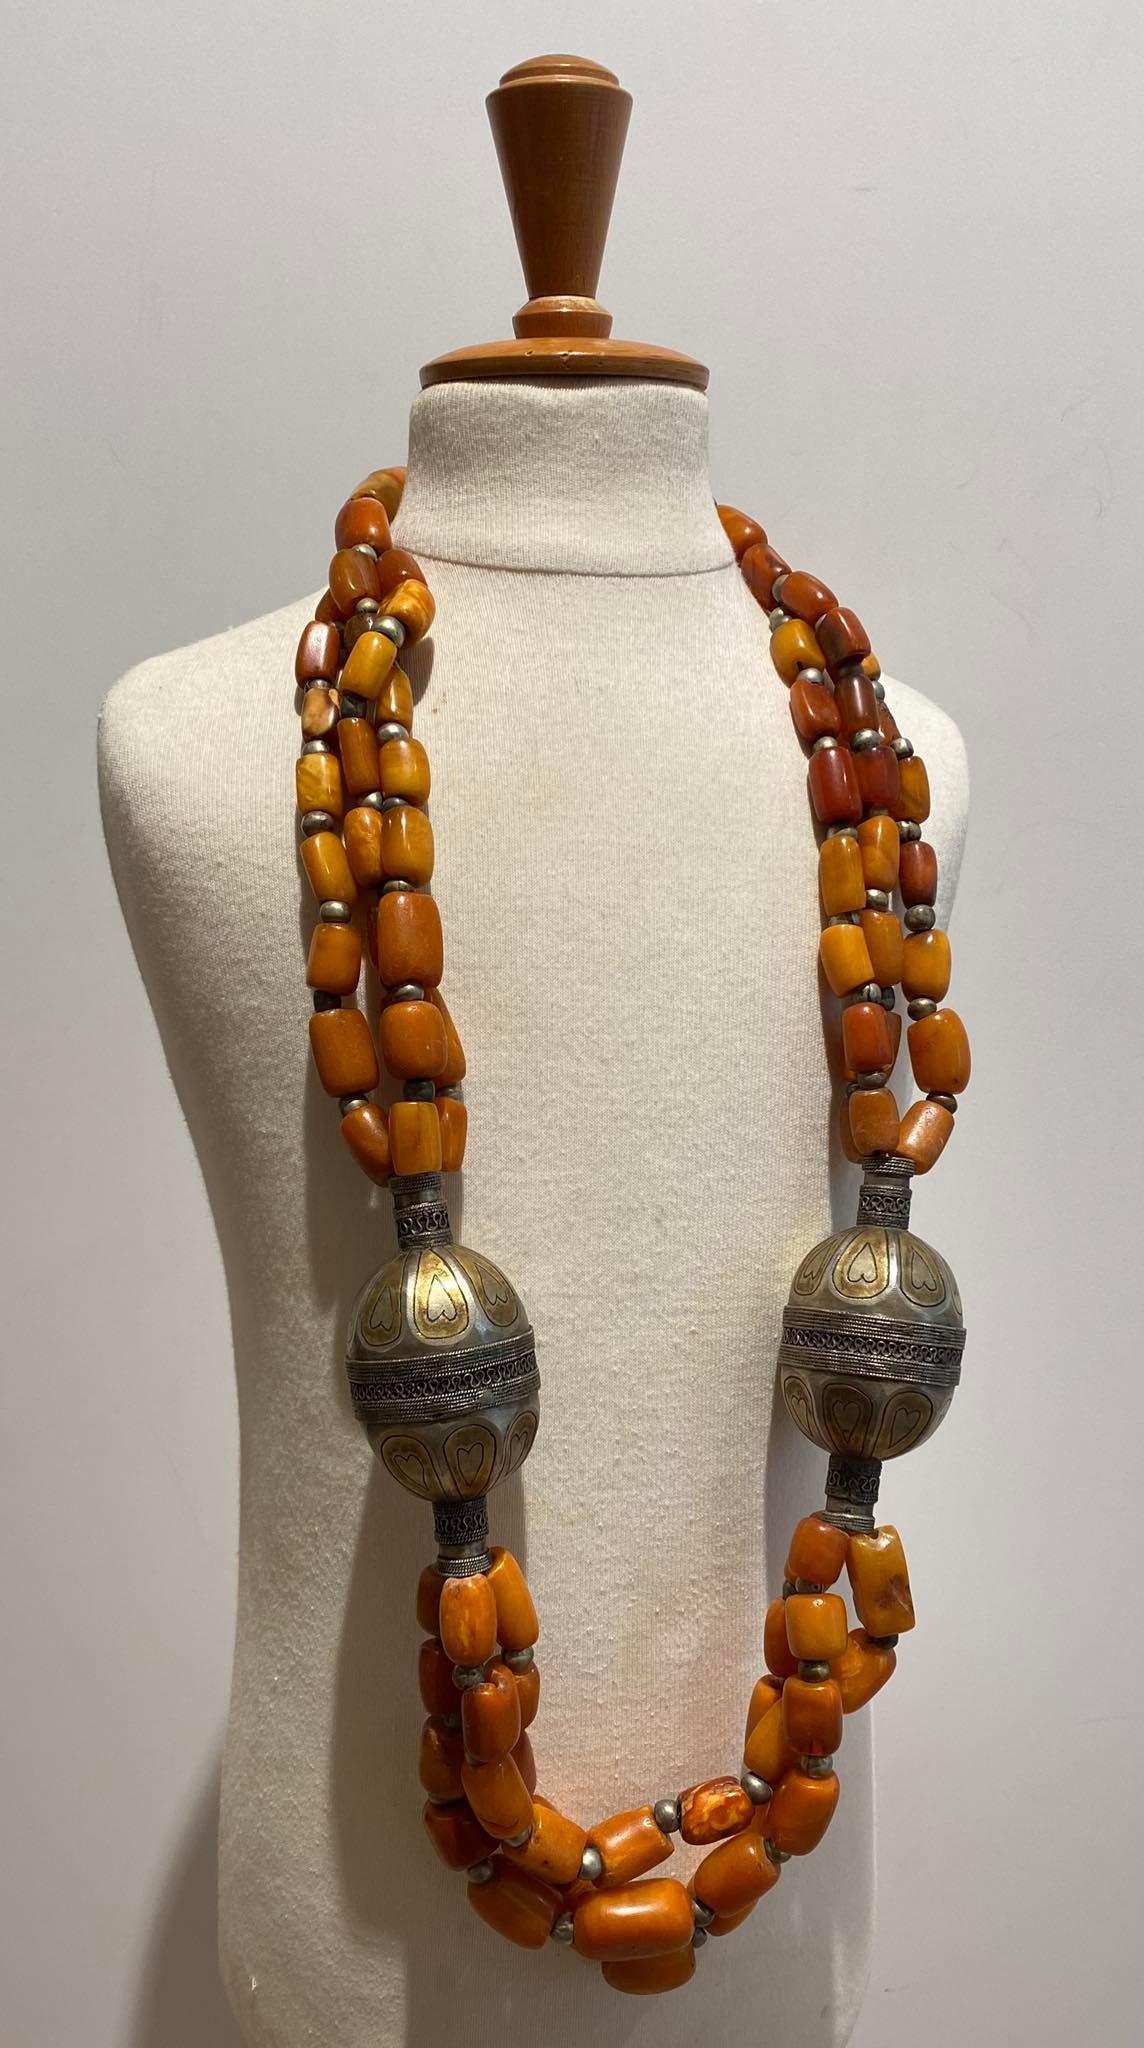  Antique Amber Necklace Yemen Afghanistan 18/19th Century Islamic Art silver  For Sale 6